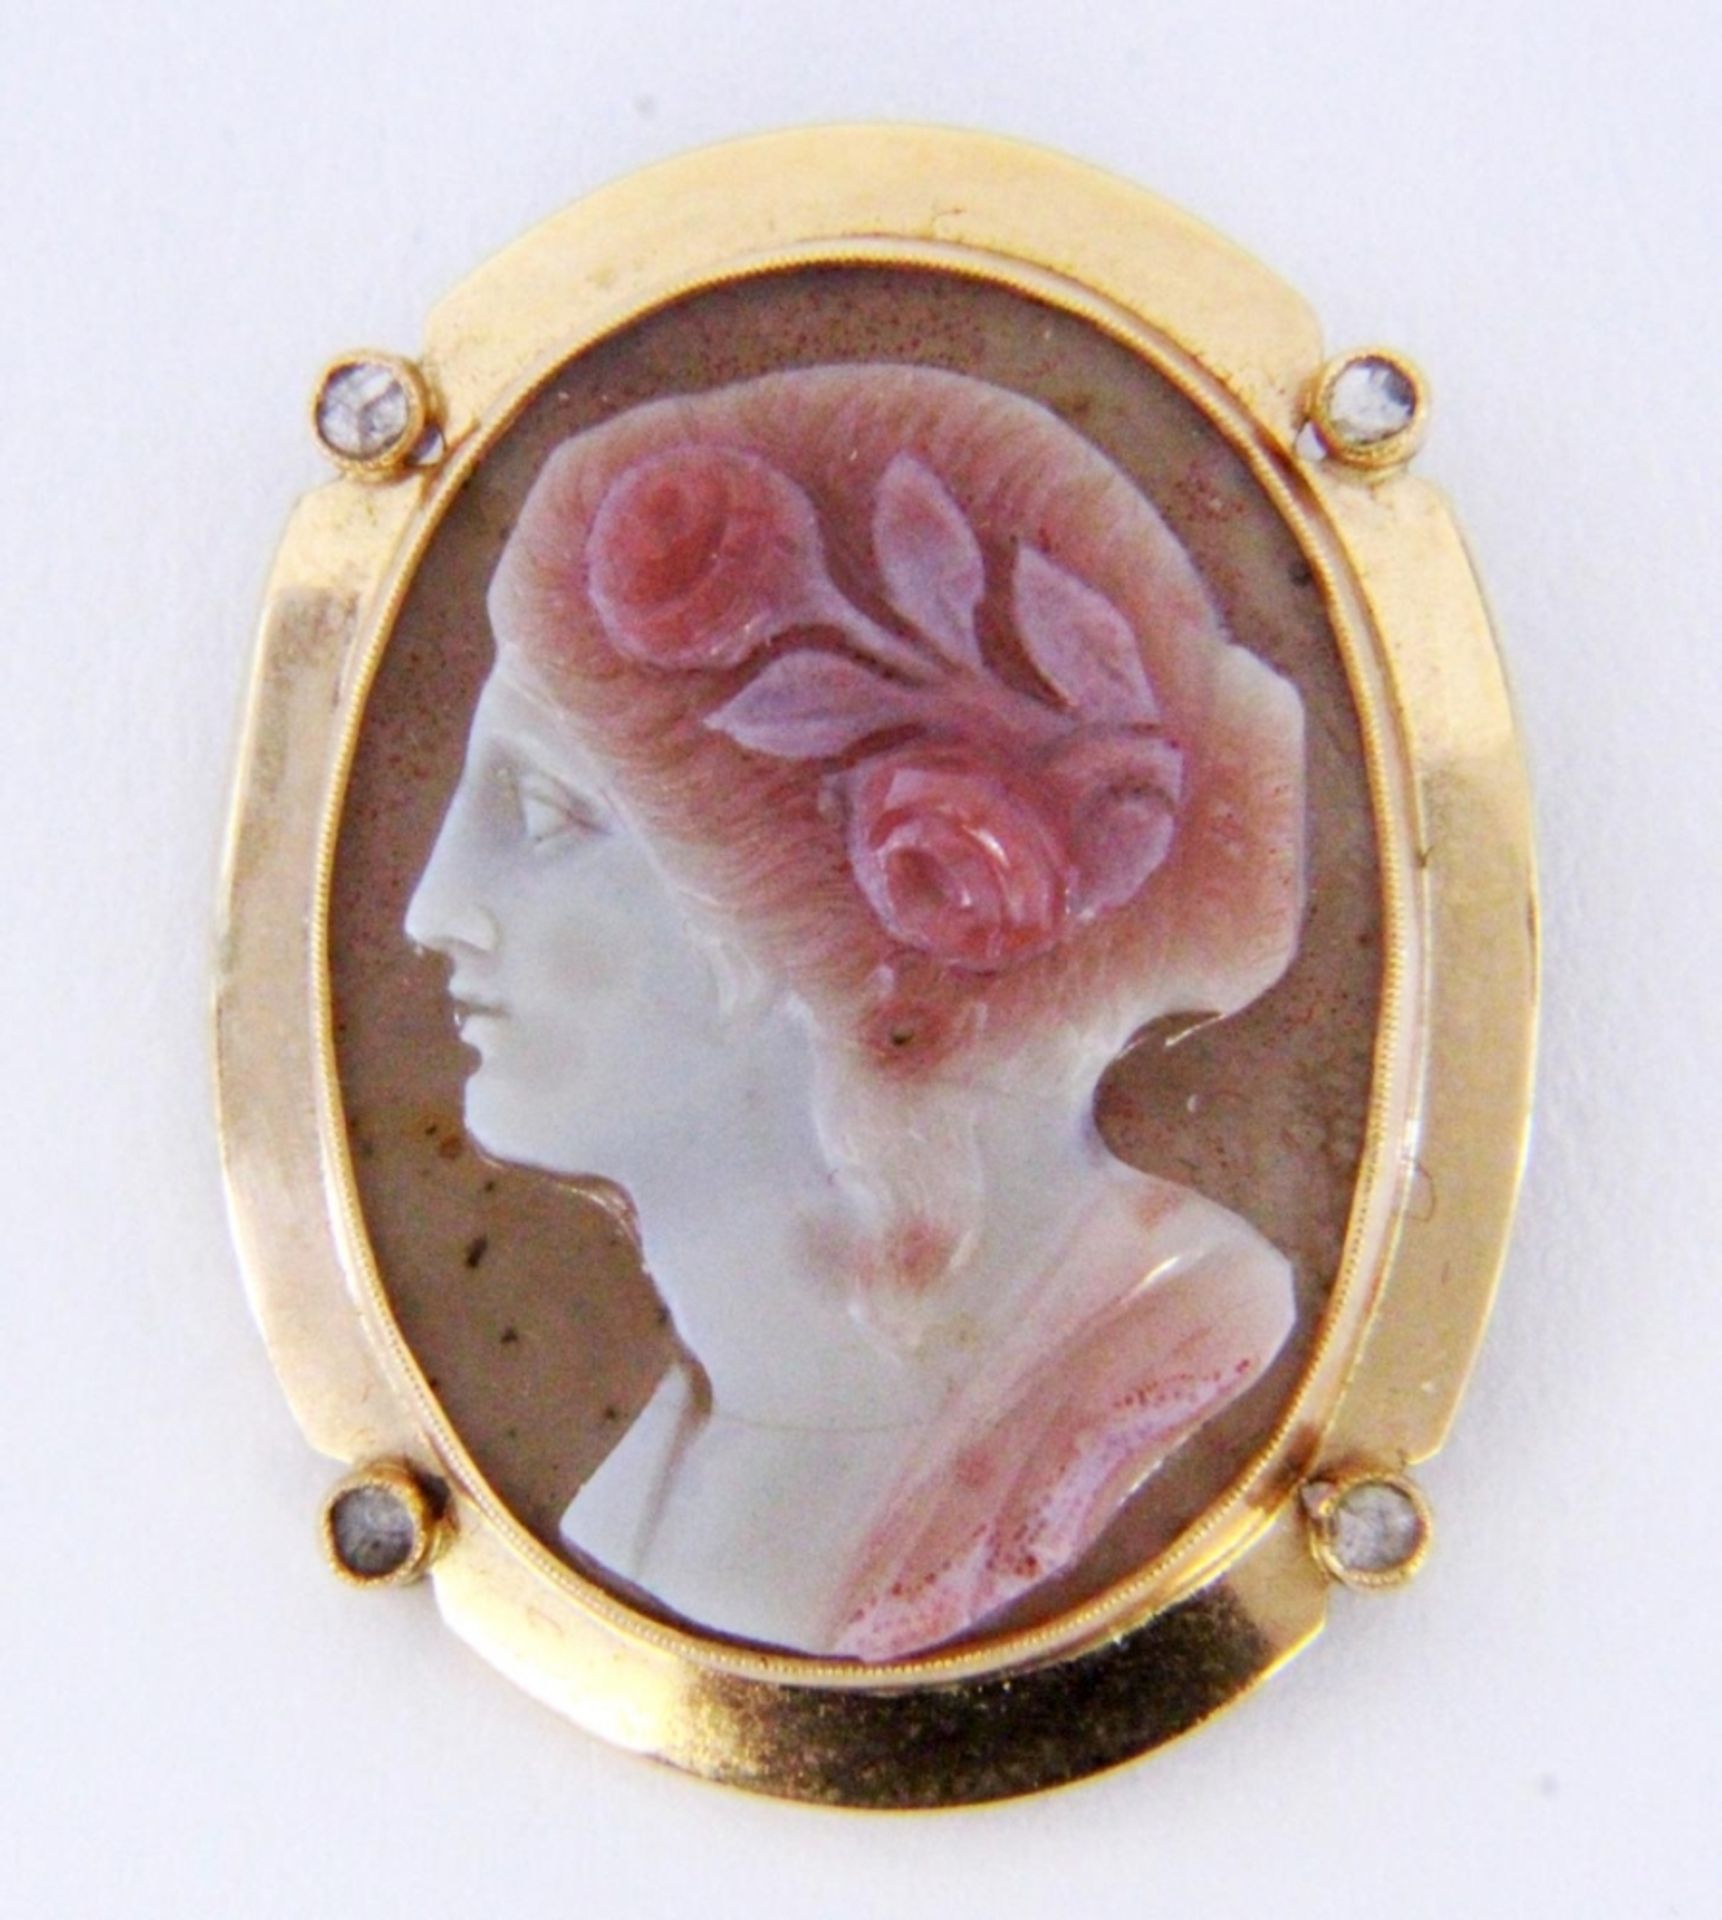 A CAMEO Brooch with finely cut cameo made from agate. 750/000 red gold setting with 4